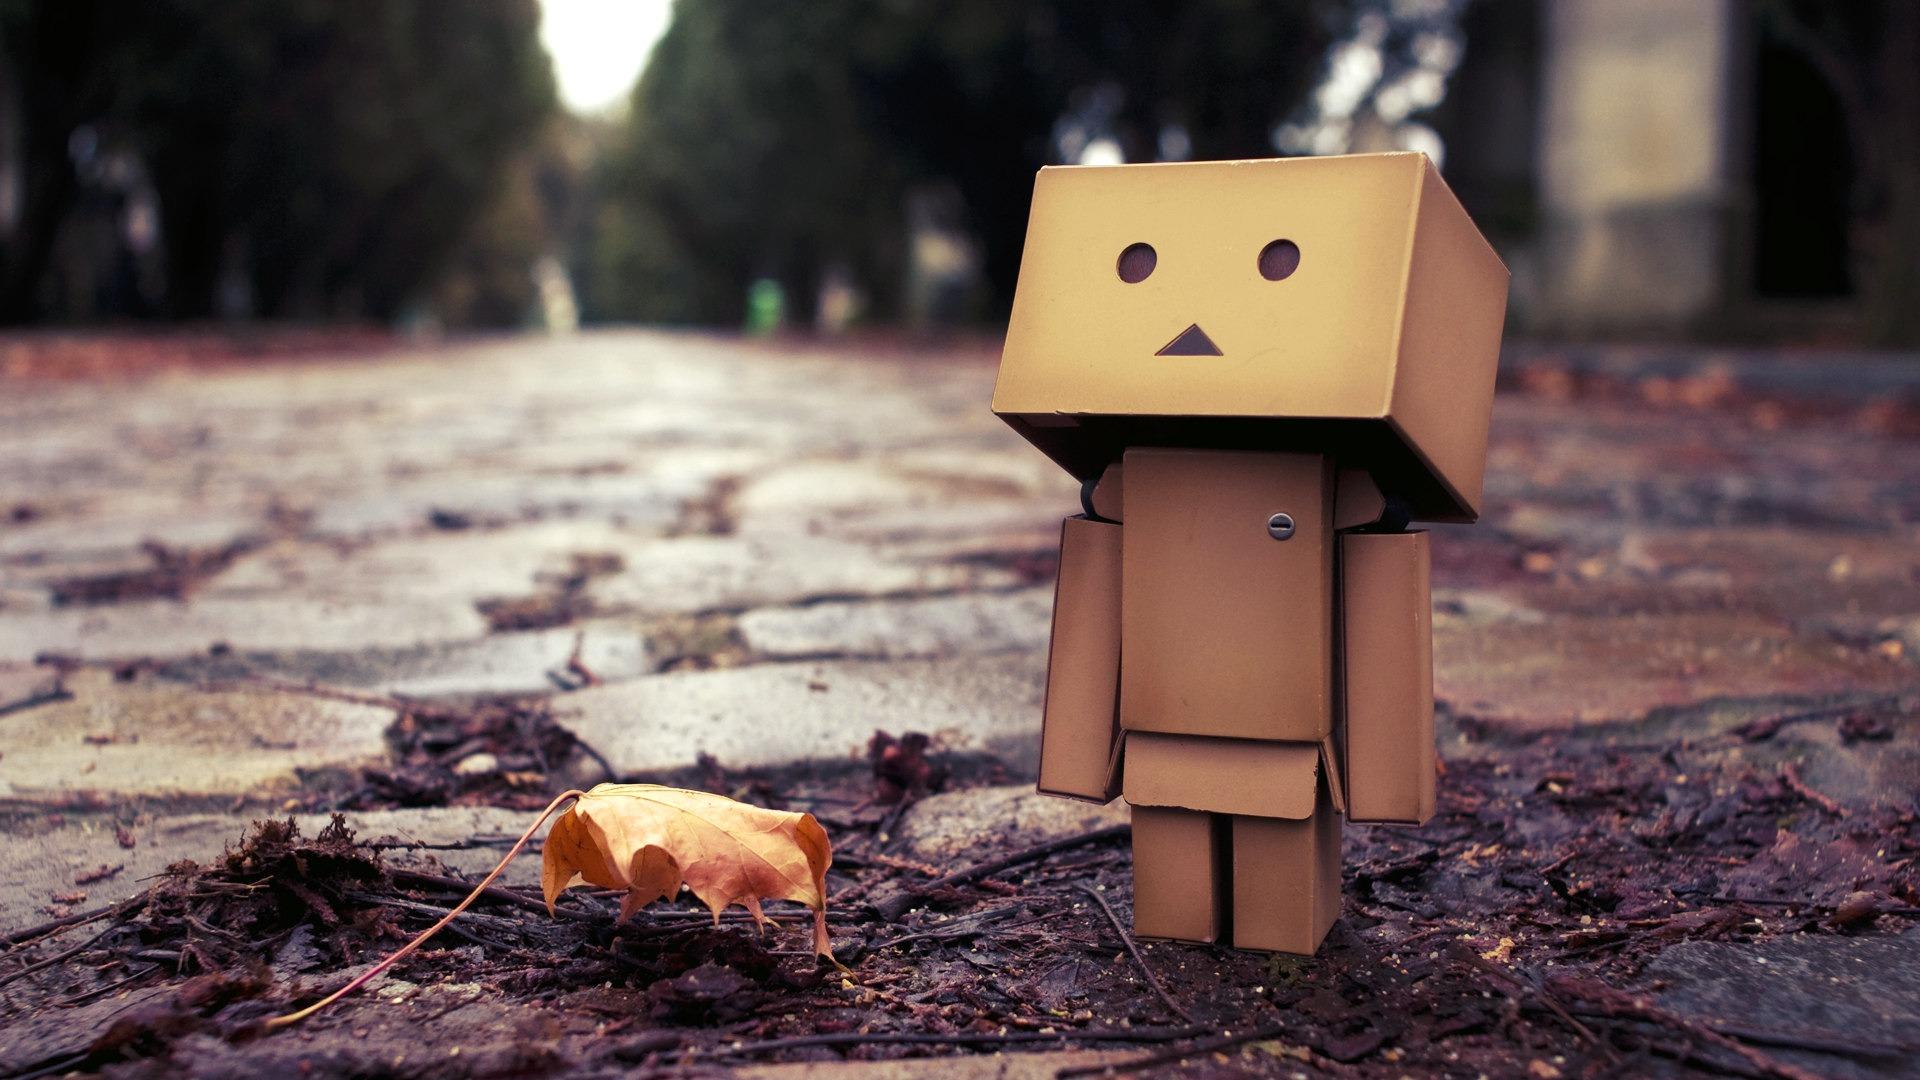 Collection by Bruce Hunter) HD Photo Collection, Image for Danbo